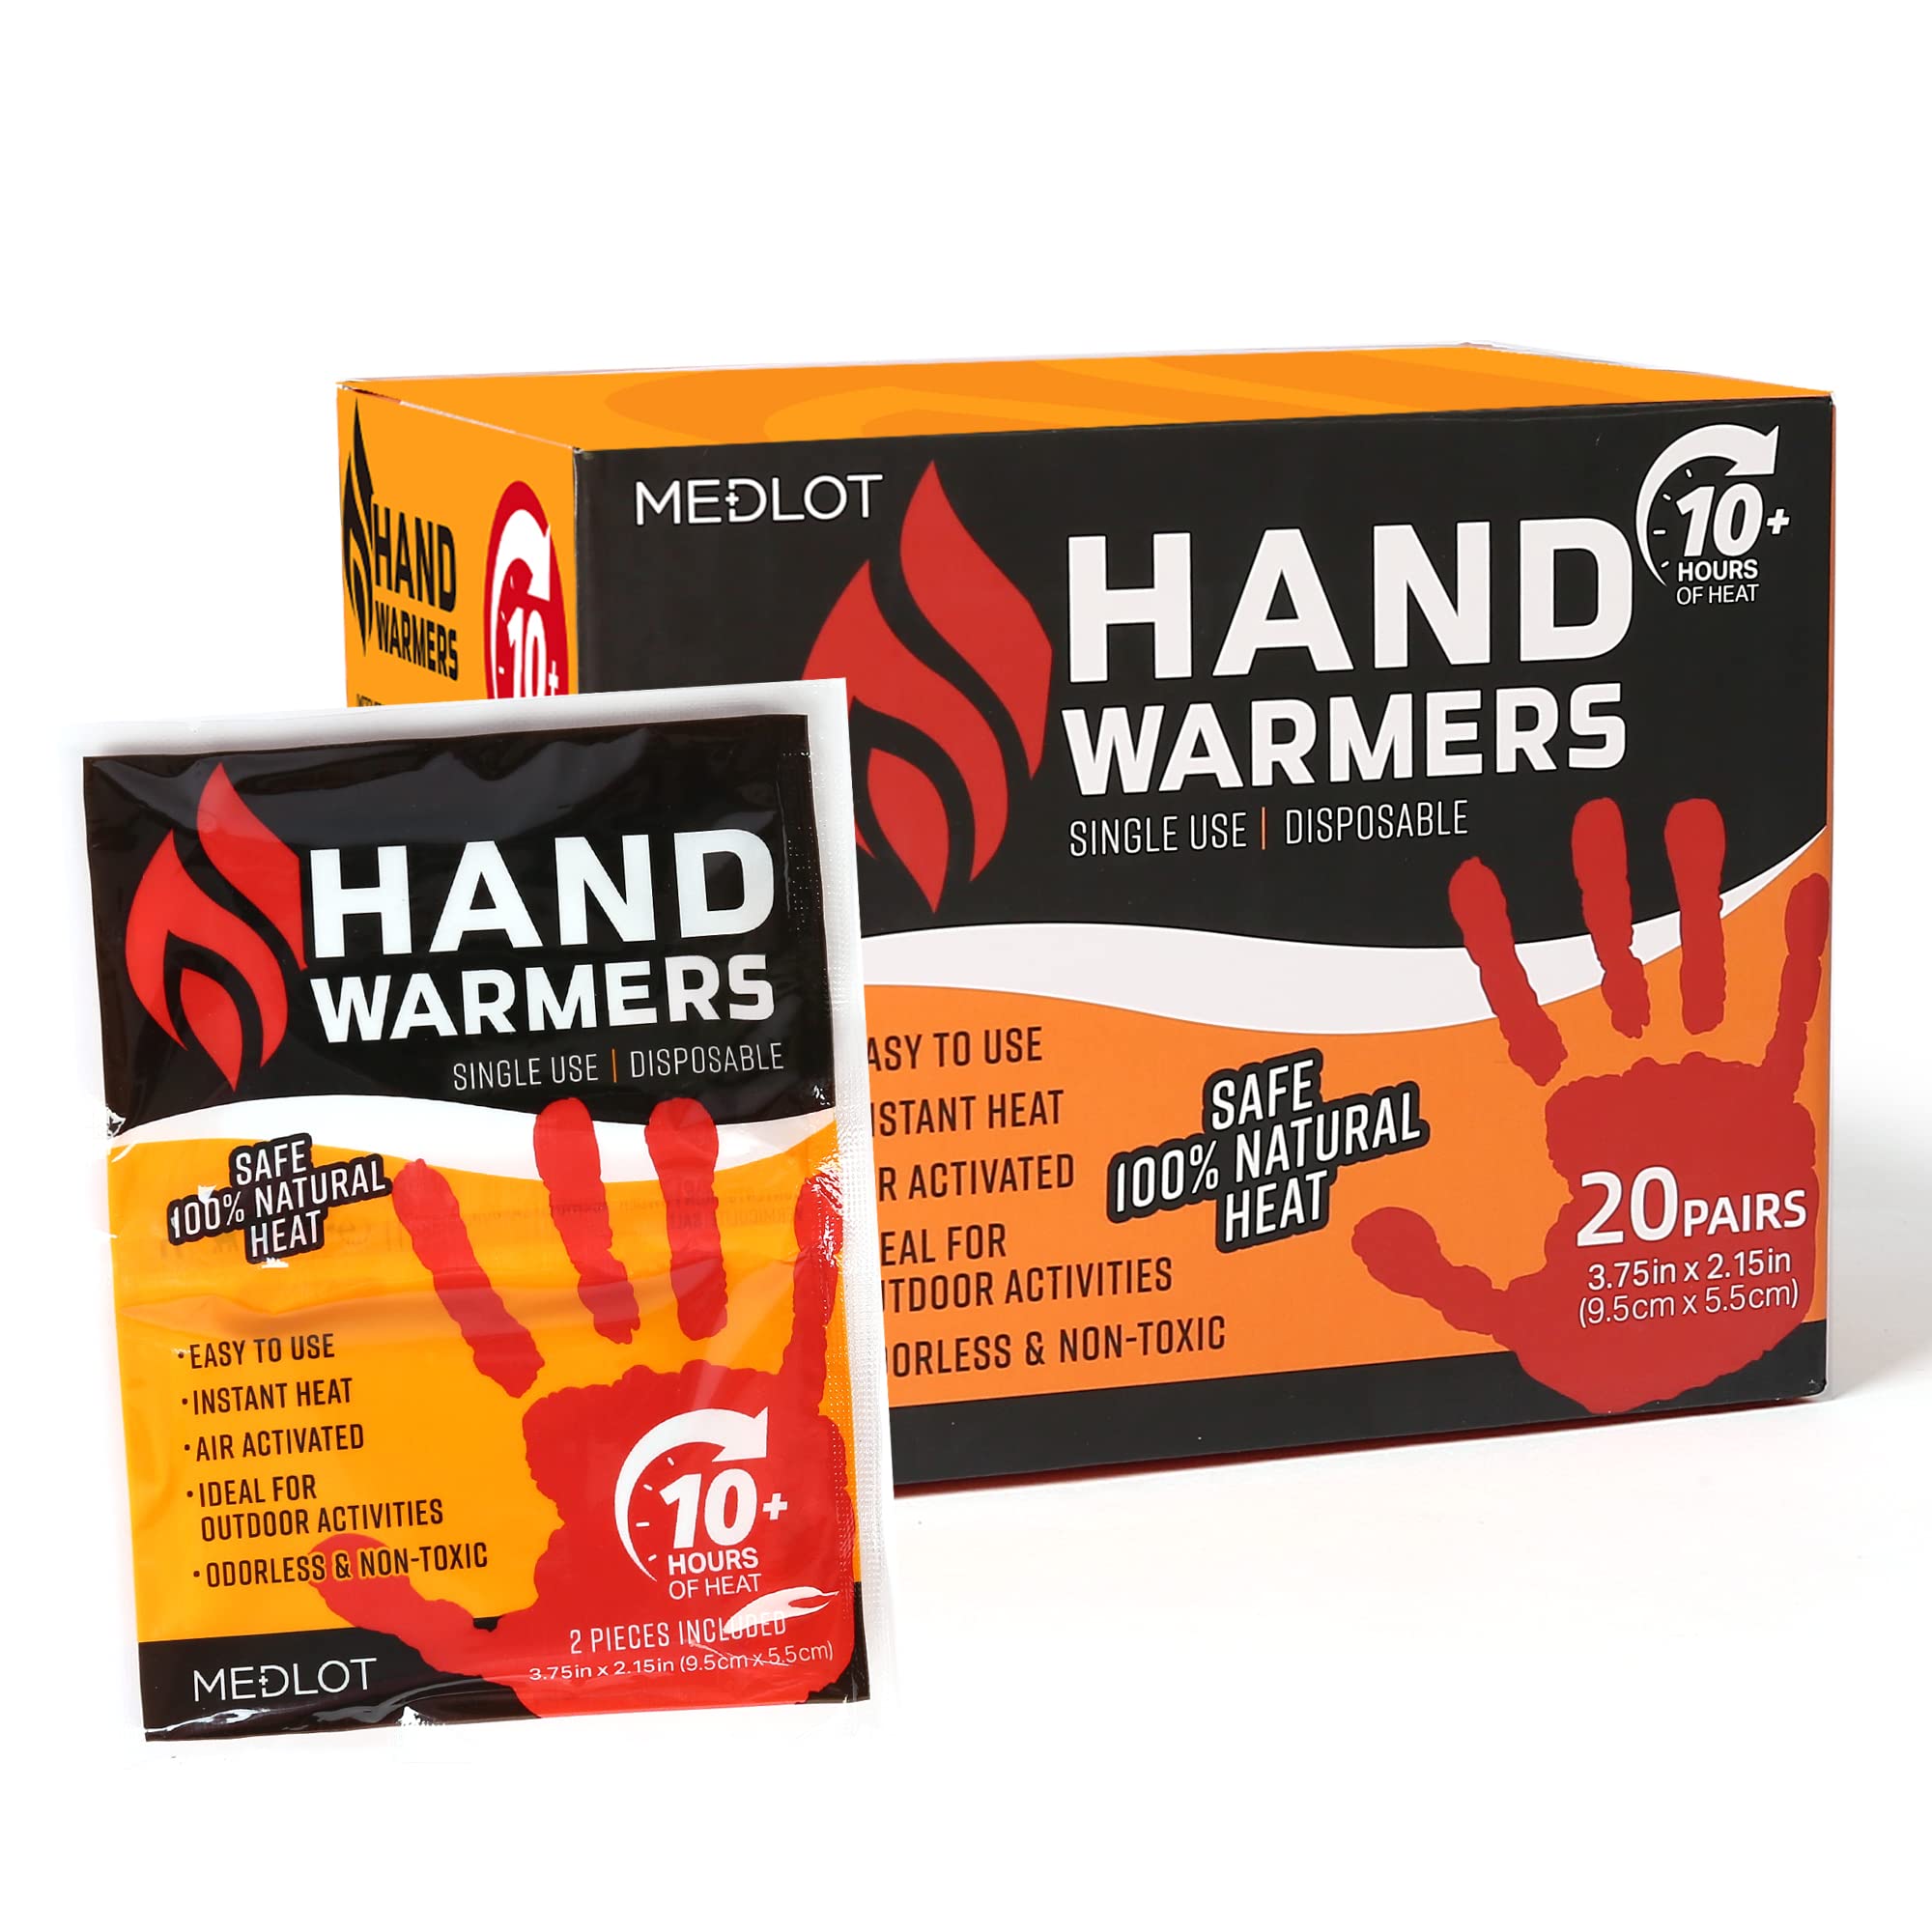 HotHands Hand Warmer Value Pack, White - 10 pairs